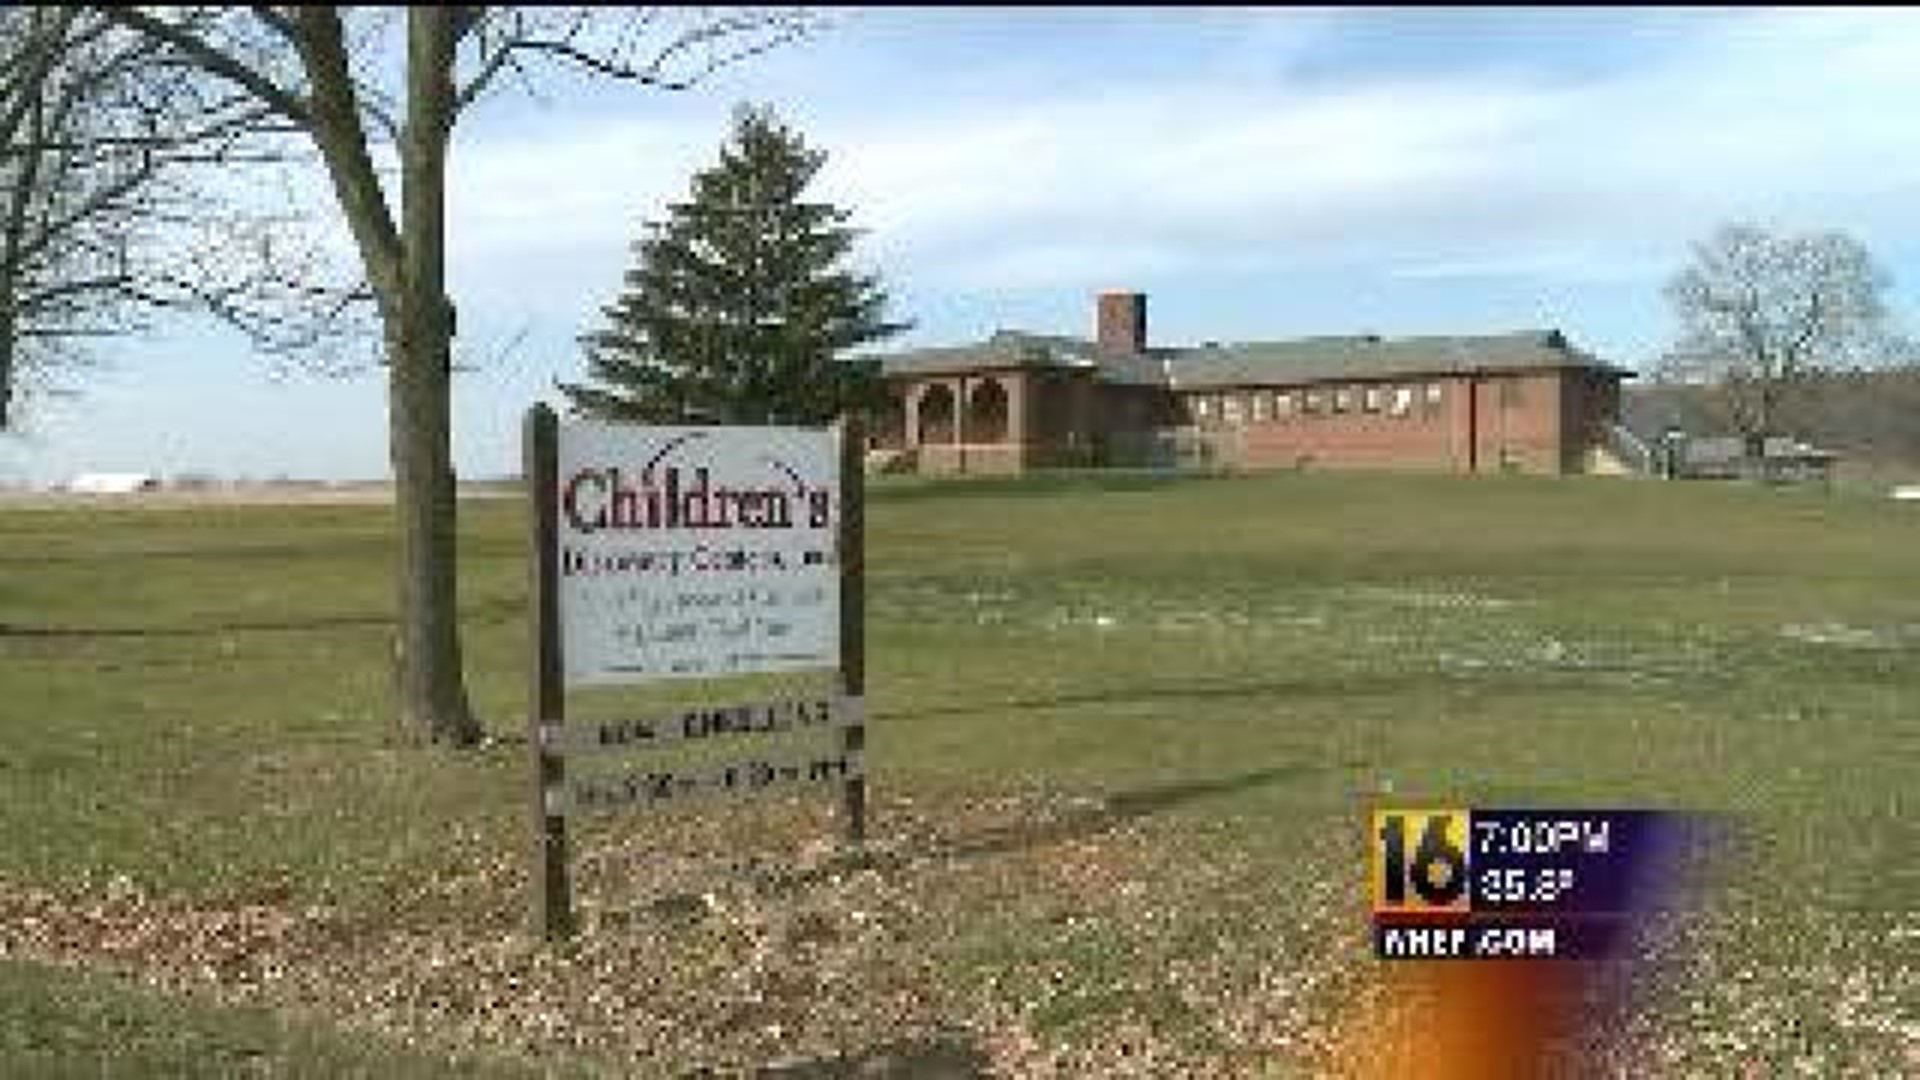 Fundraiser to Help Day Care Center